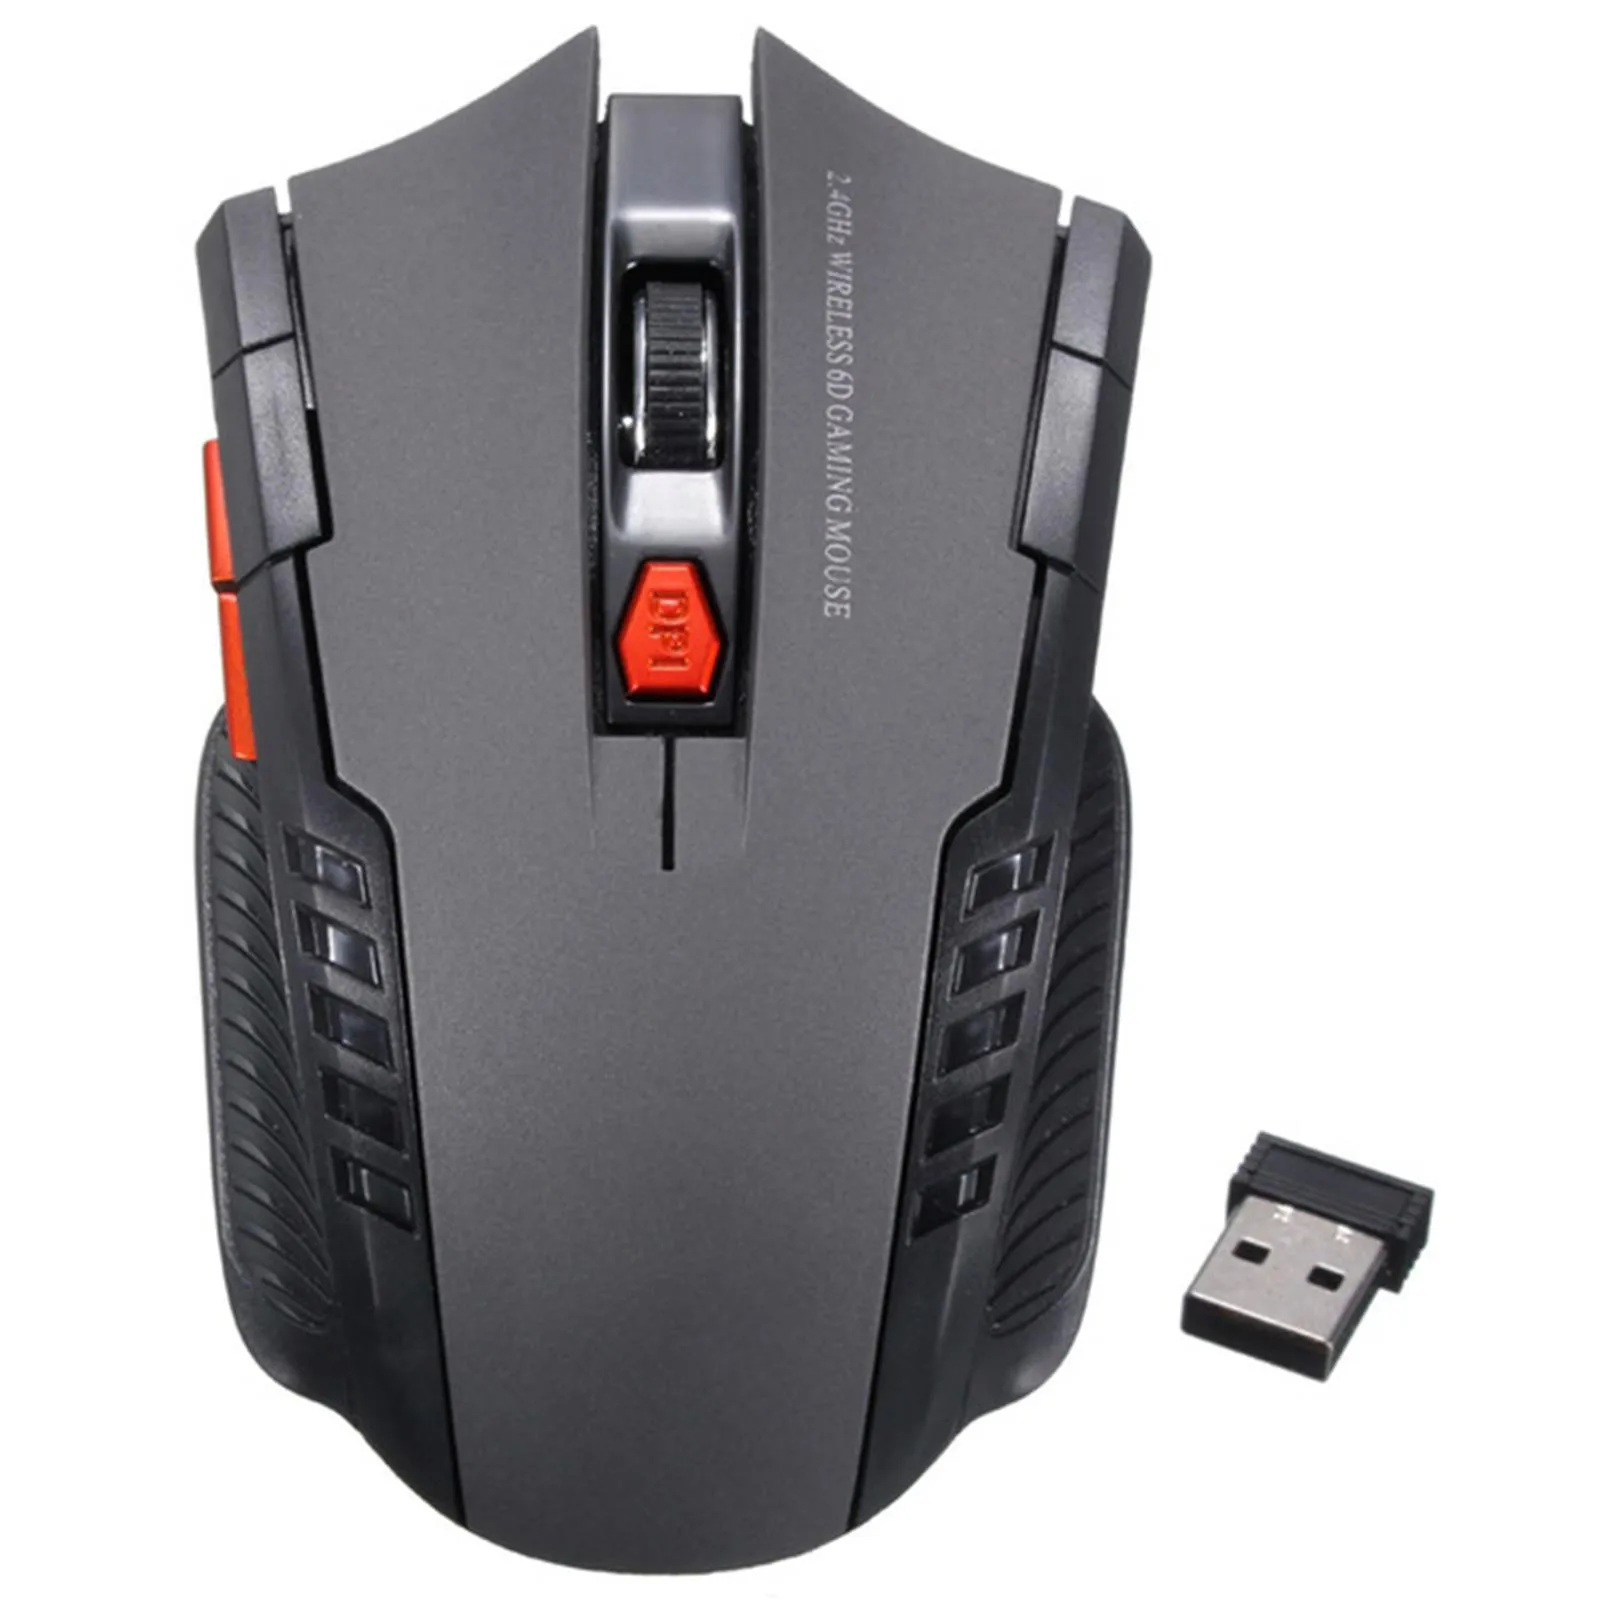 2000DPI 2.4GHz Wireless Optical Mouse Gamer for PC Gaming Laptops New Game Wireless Mice with USB Receiver Drop Shipping Mause silent wireless mouse Mice